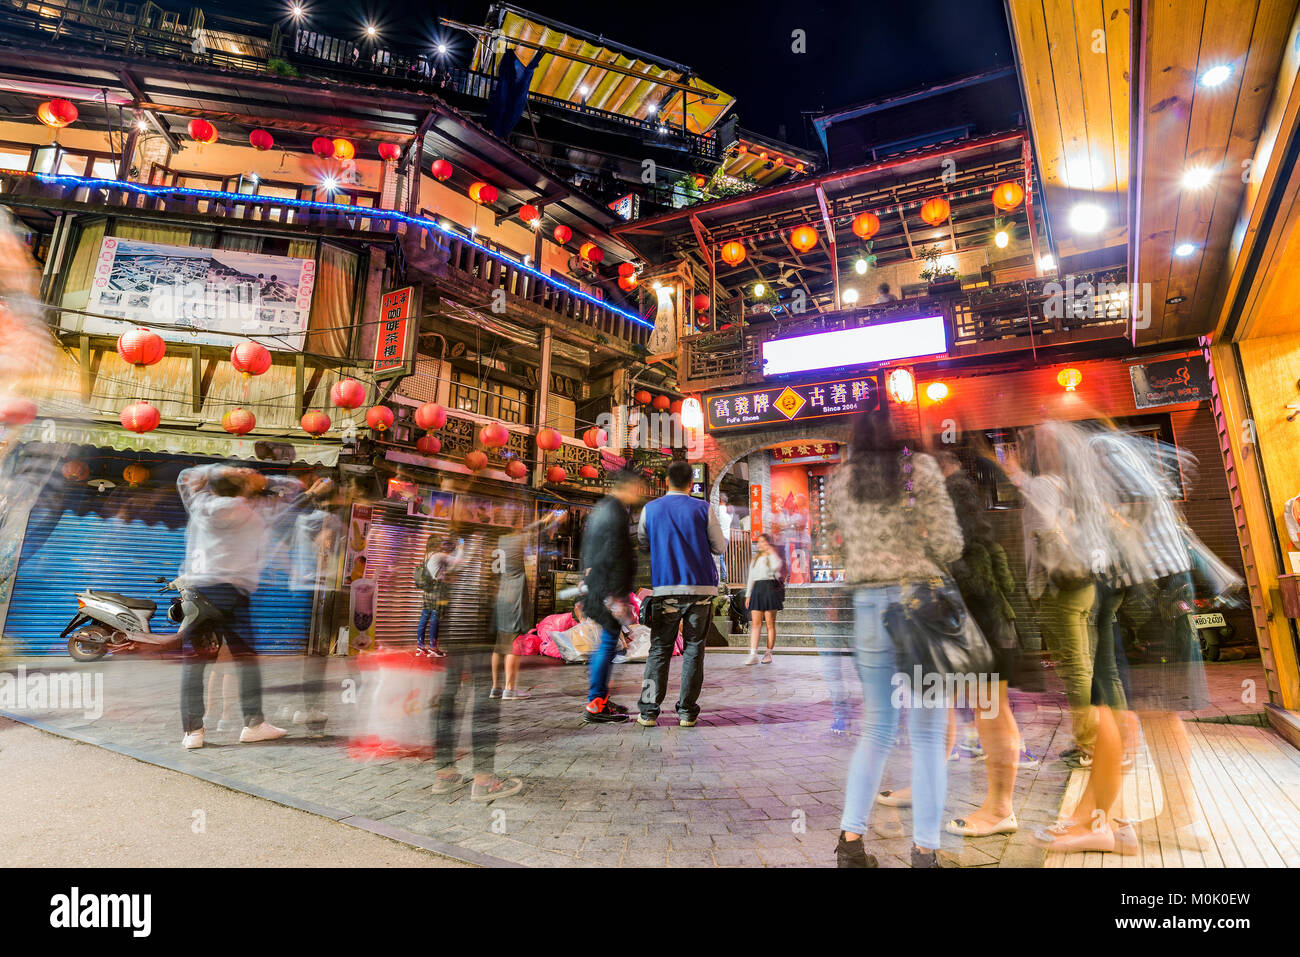 TAIPEI, TAIWAN - DECEMBER 19: Night view of teahouses and traditional Chinese architecture in Jiufen village on December 19, 2016 in Taipei Stock Photo